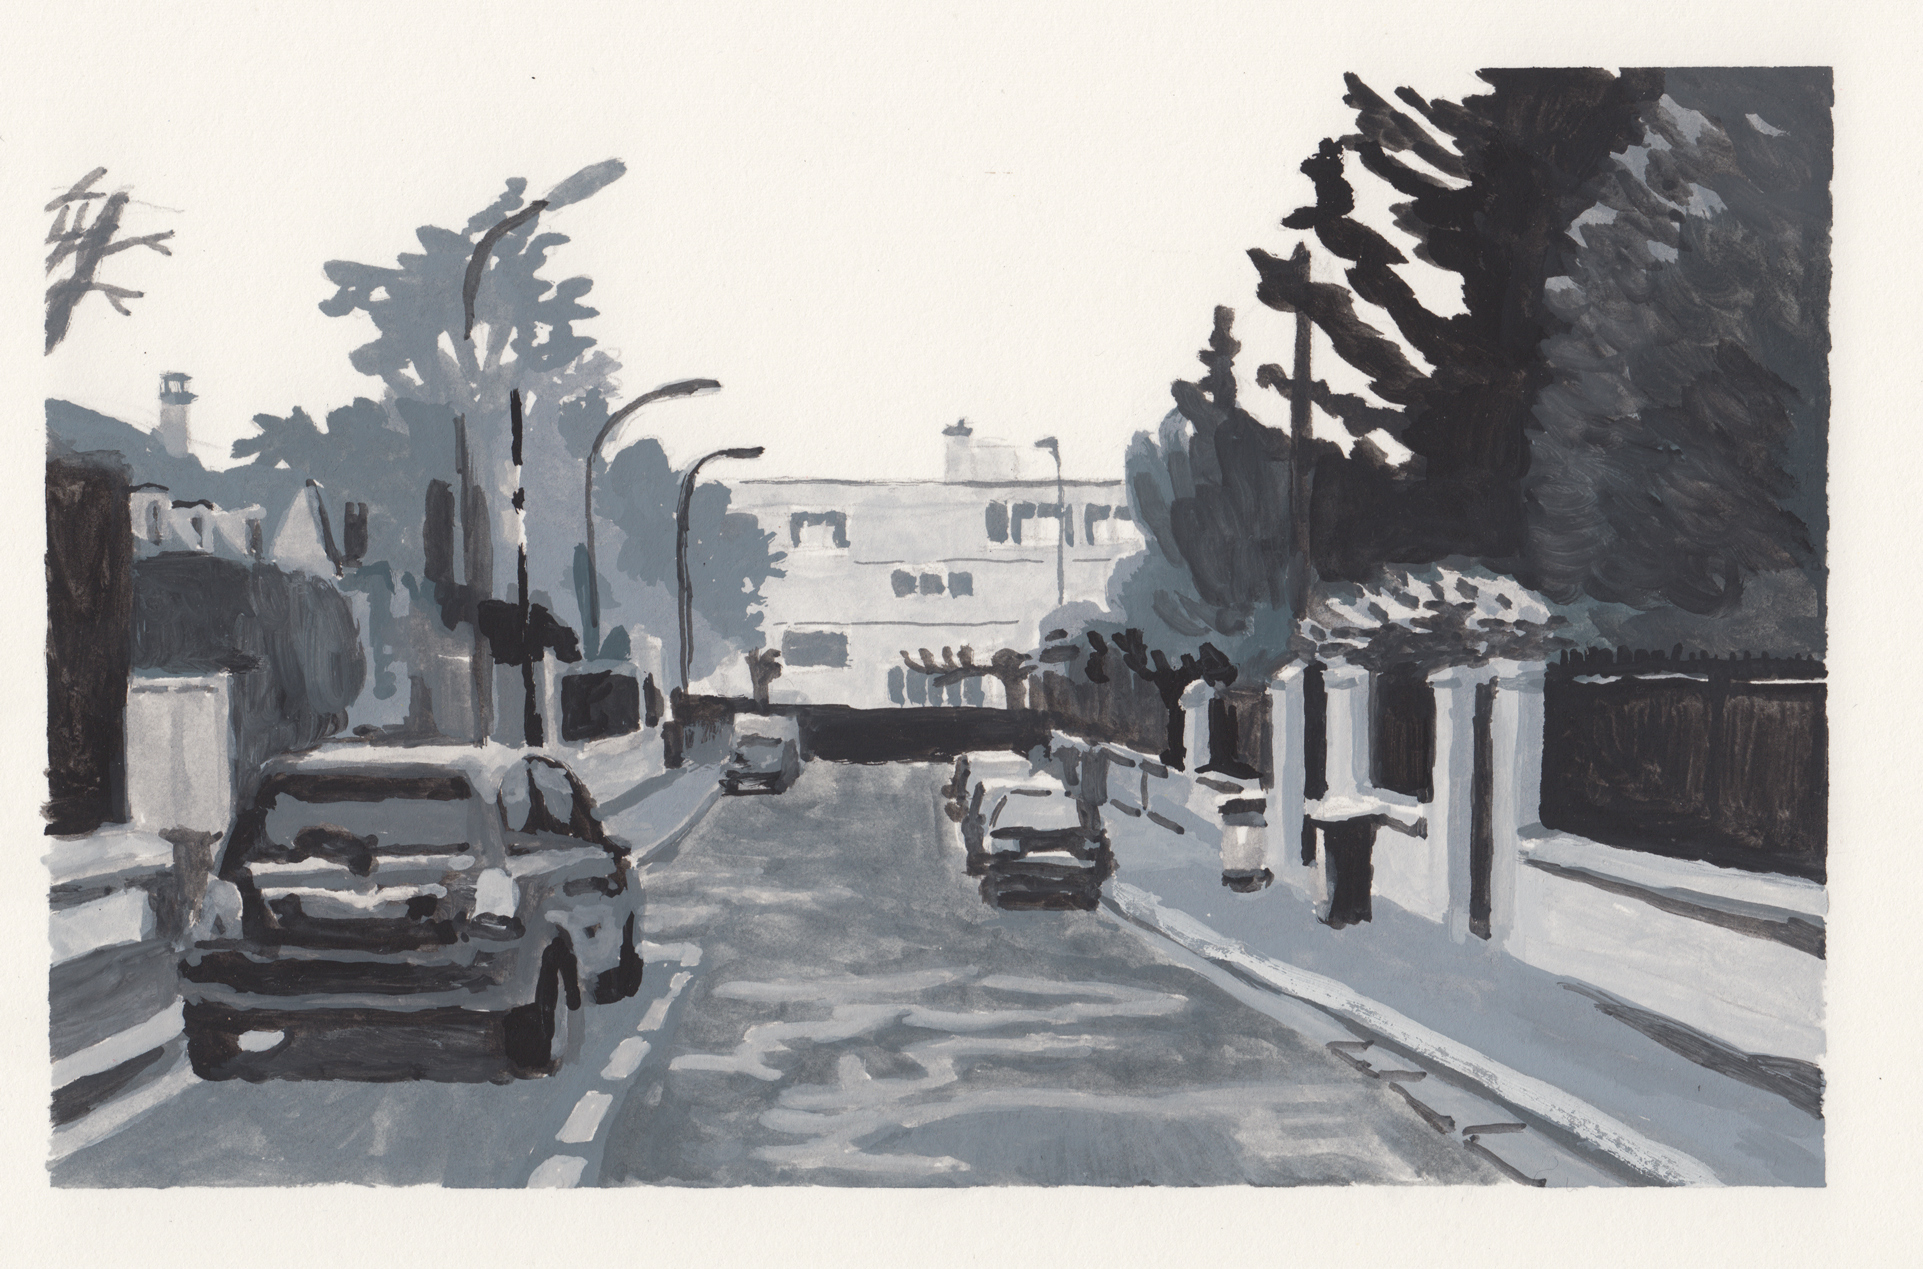   Painting series and short film project on Paris’ suburb landscapes bound to change due to the quick building of new villas and residencies,   Gouache on paper   